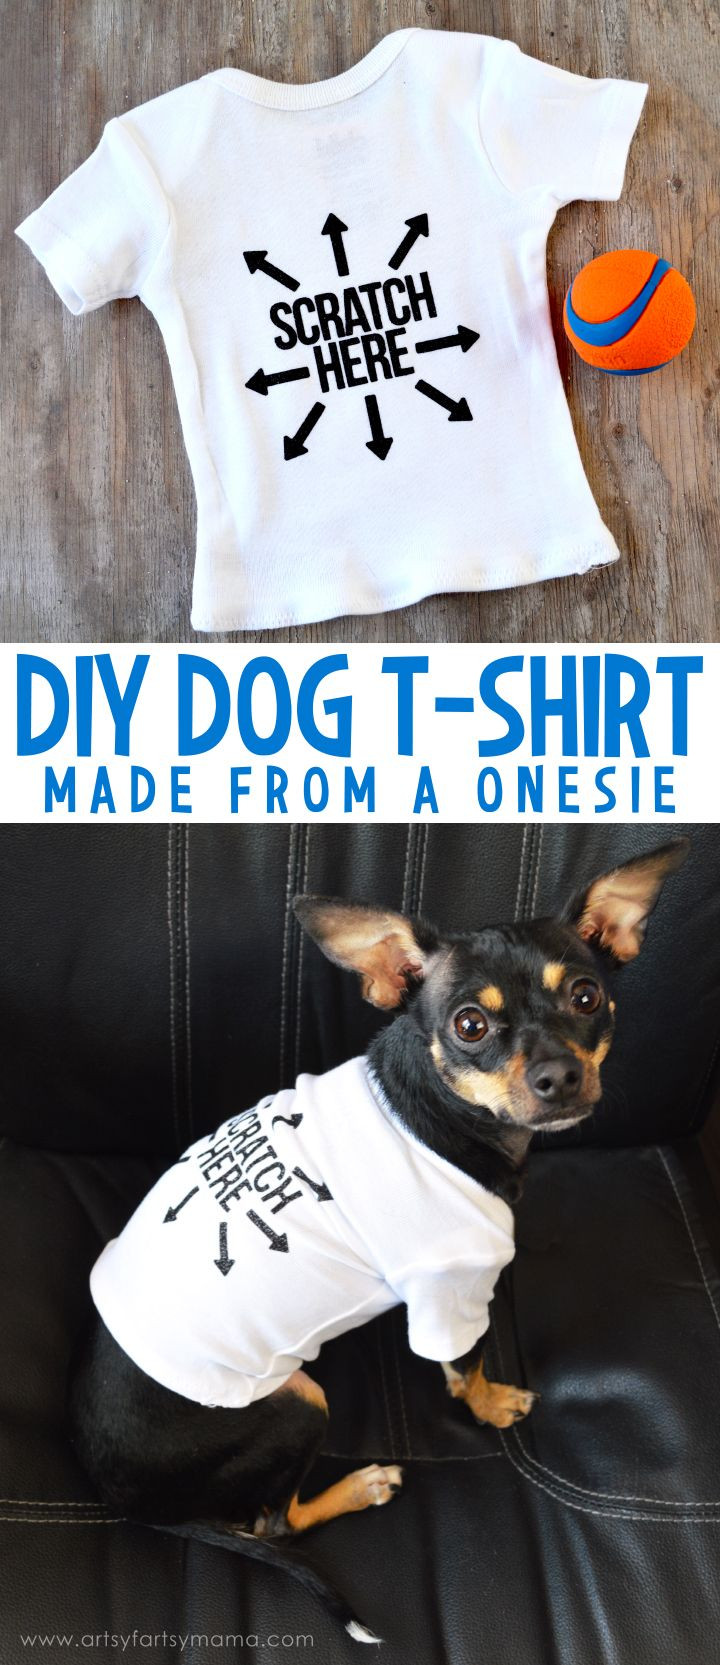 DIY Dog Clothes From Baby Clothes
 2302 best images about Cricut ideas on Pinterest